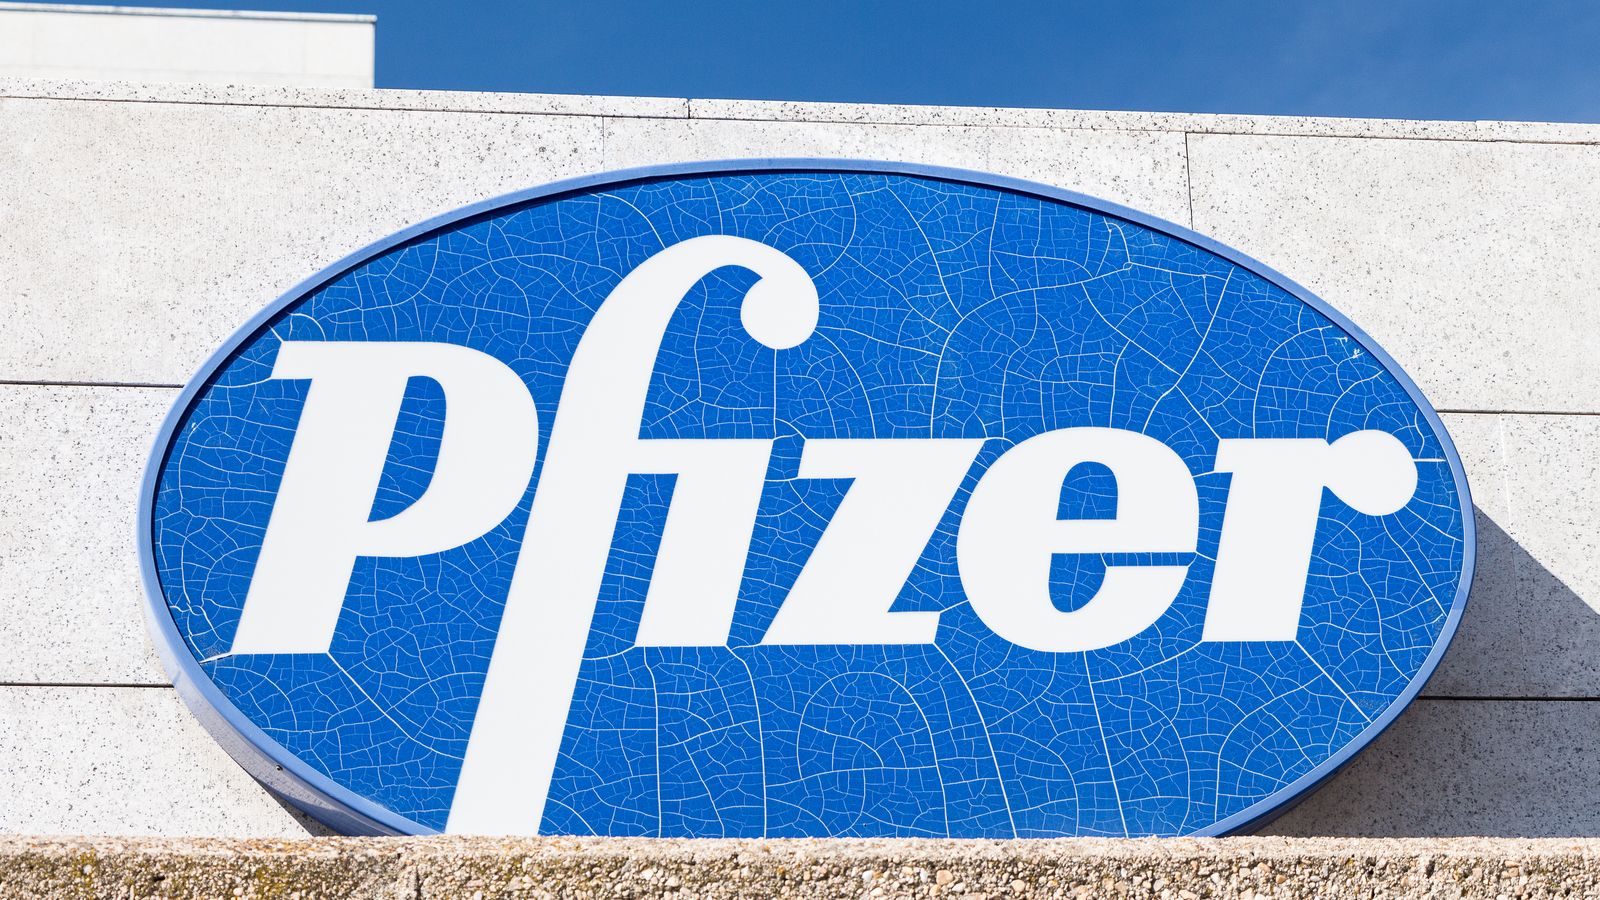 Pfizer (PFE) Stock Price Can Be Boosted by Acquisition InvestorPlace